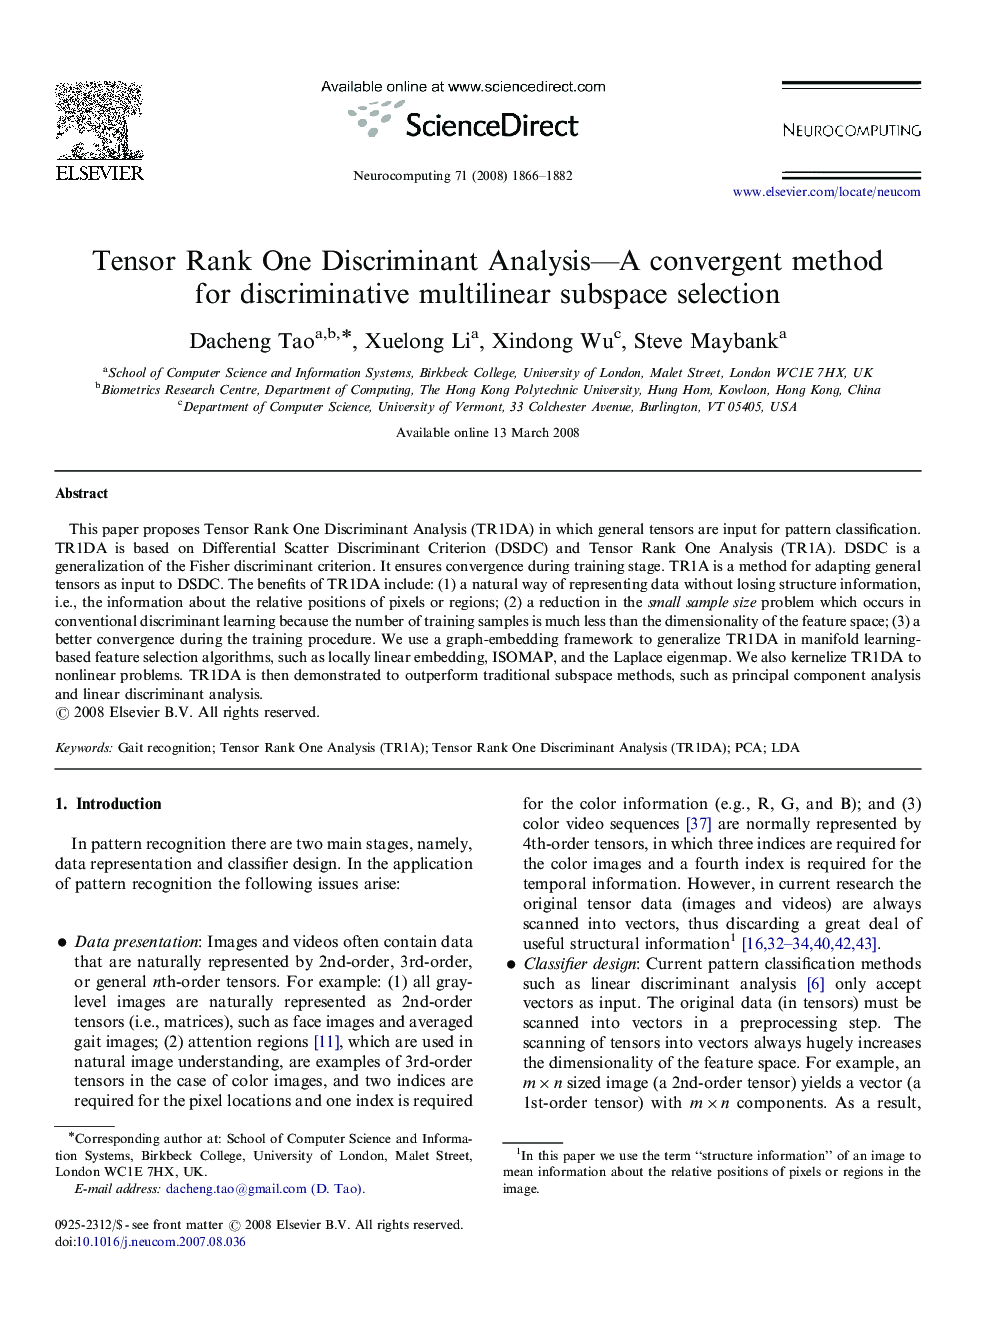 Tensor Rank One Discriminant Analysis—A convergent method for discriminative multilinear subspace selection